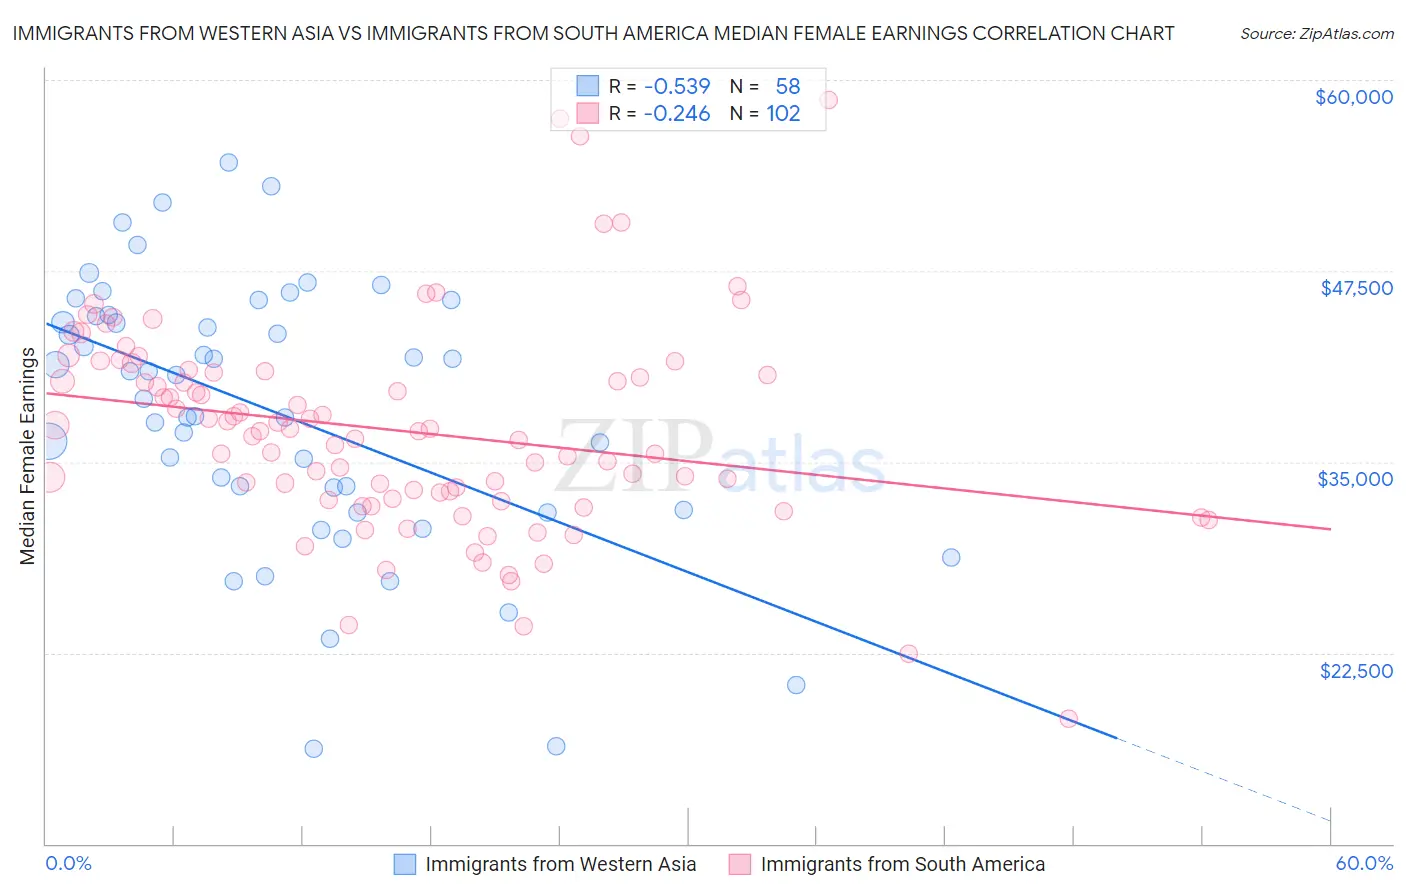 Immigrants from Western Asia vs Immigrants from South America Median Female Earnings